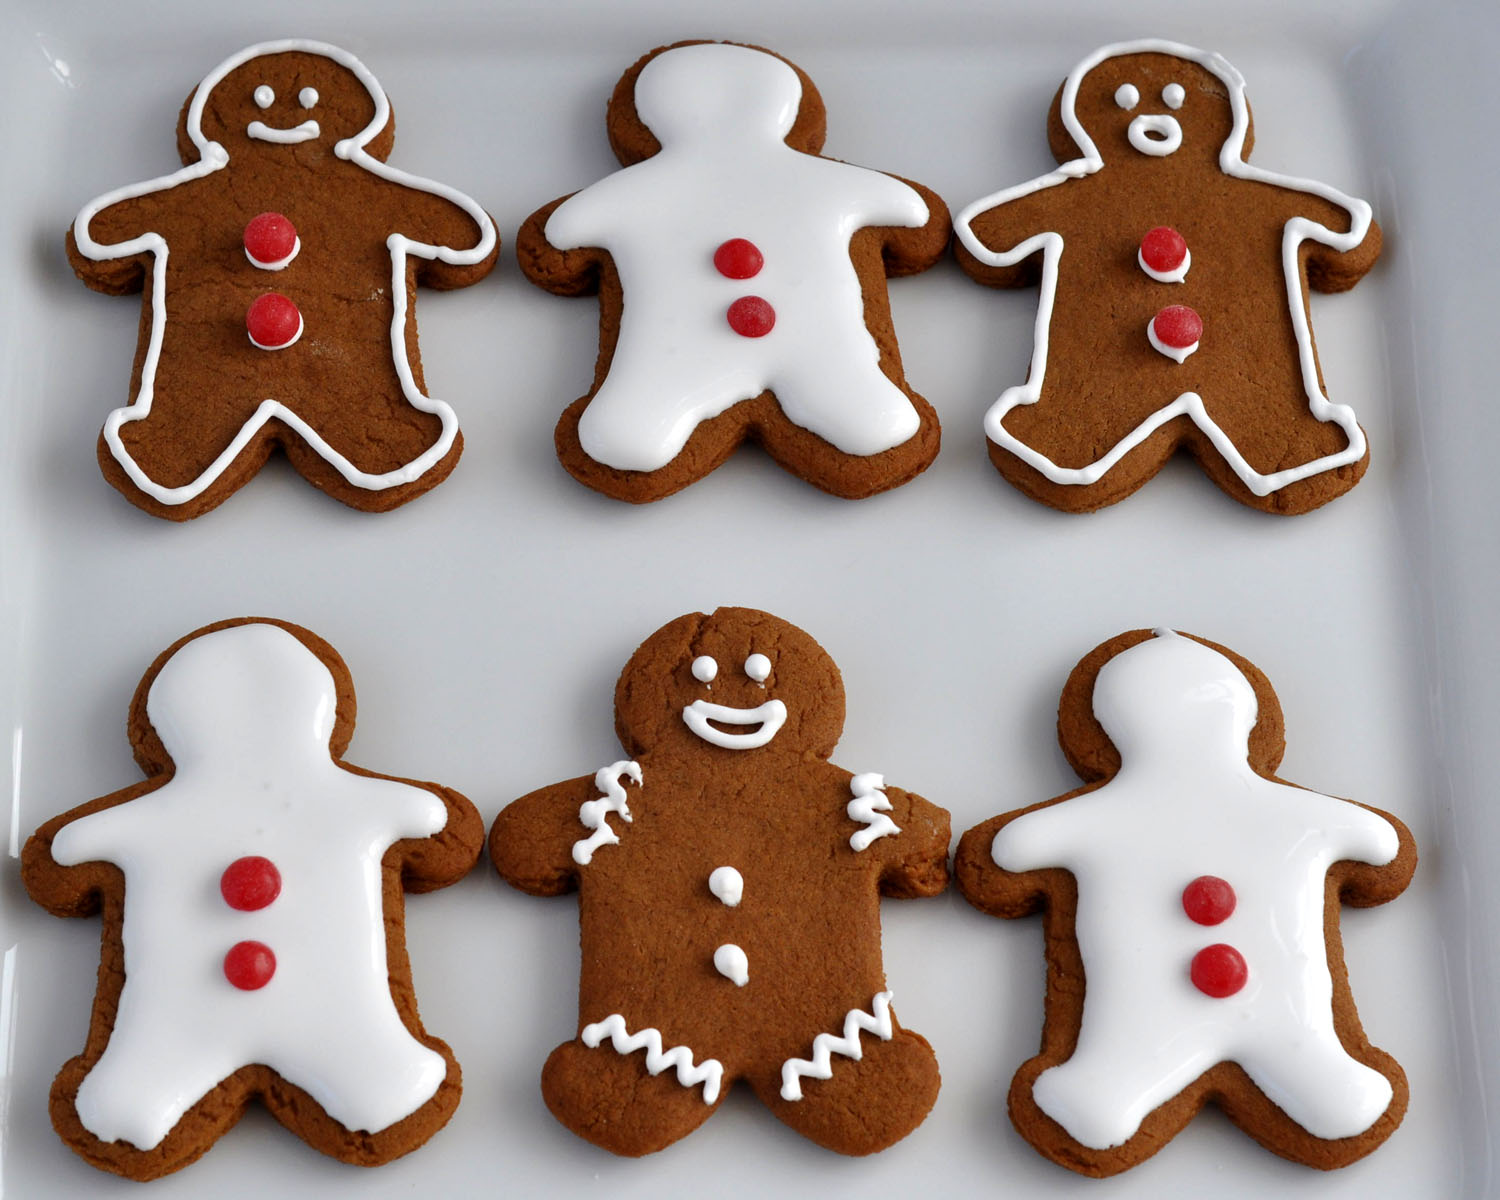 Shop for archway holiday iced gingerbread cookies at dillons food stores. 